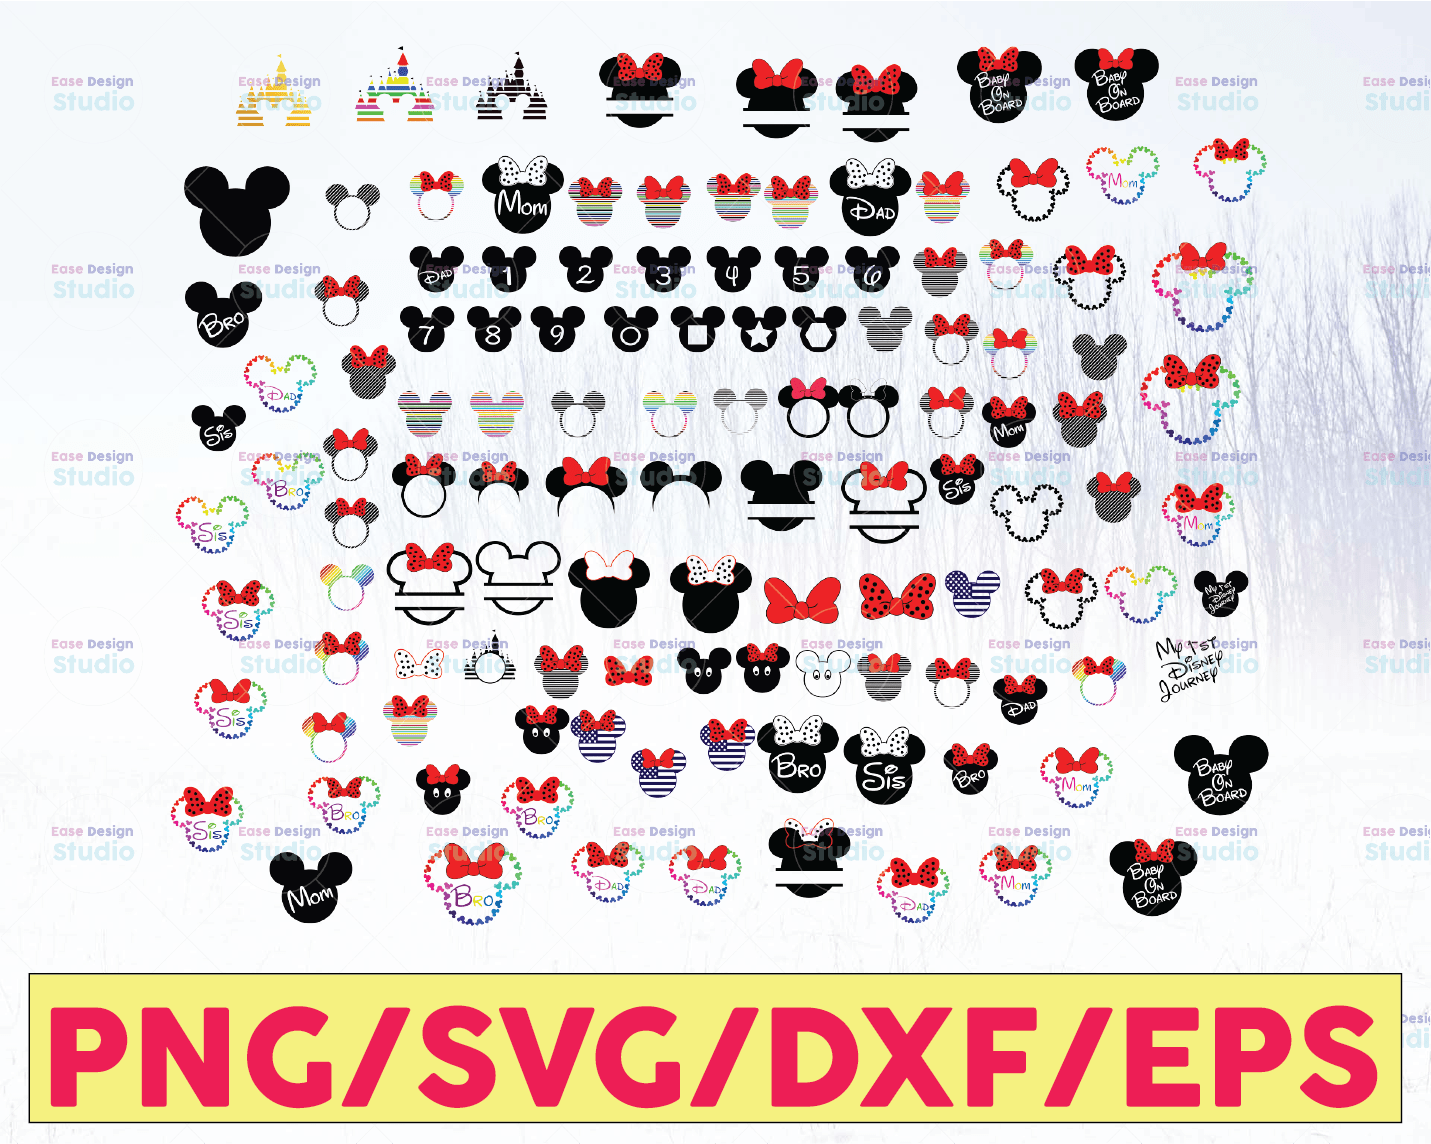 Download Disney Svg Bundle Mickey Svg Minnie Svg Disney Svg Disney Monogram Frames Svg Disney Svg Files For Silhouette Cameo Or Cricut Vectorency